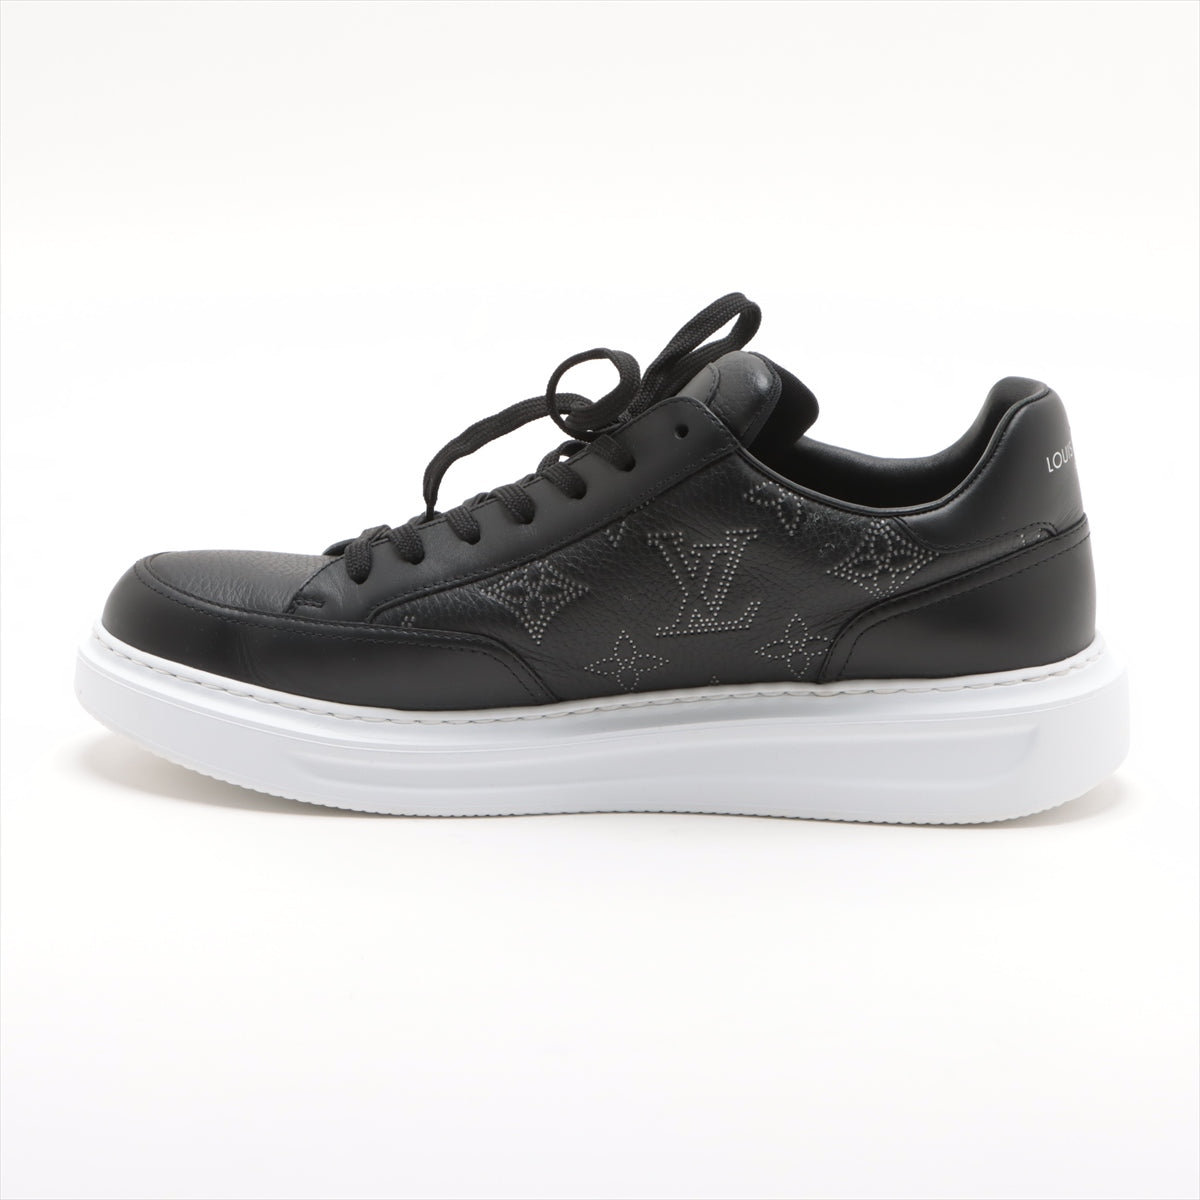 Louis Vuitton Beverly Hills Line 22 years Leather Sneakers 9 1/2 Men's Black DD0272 Monogram